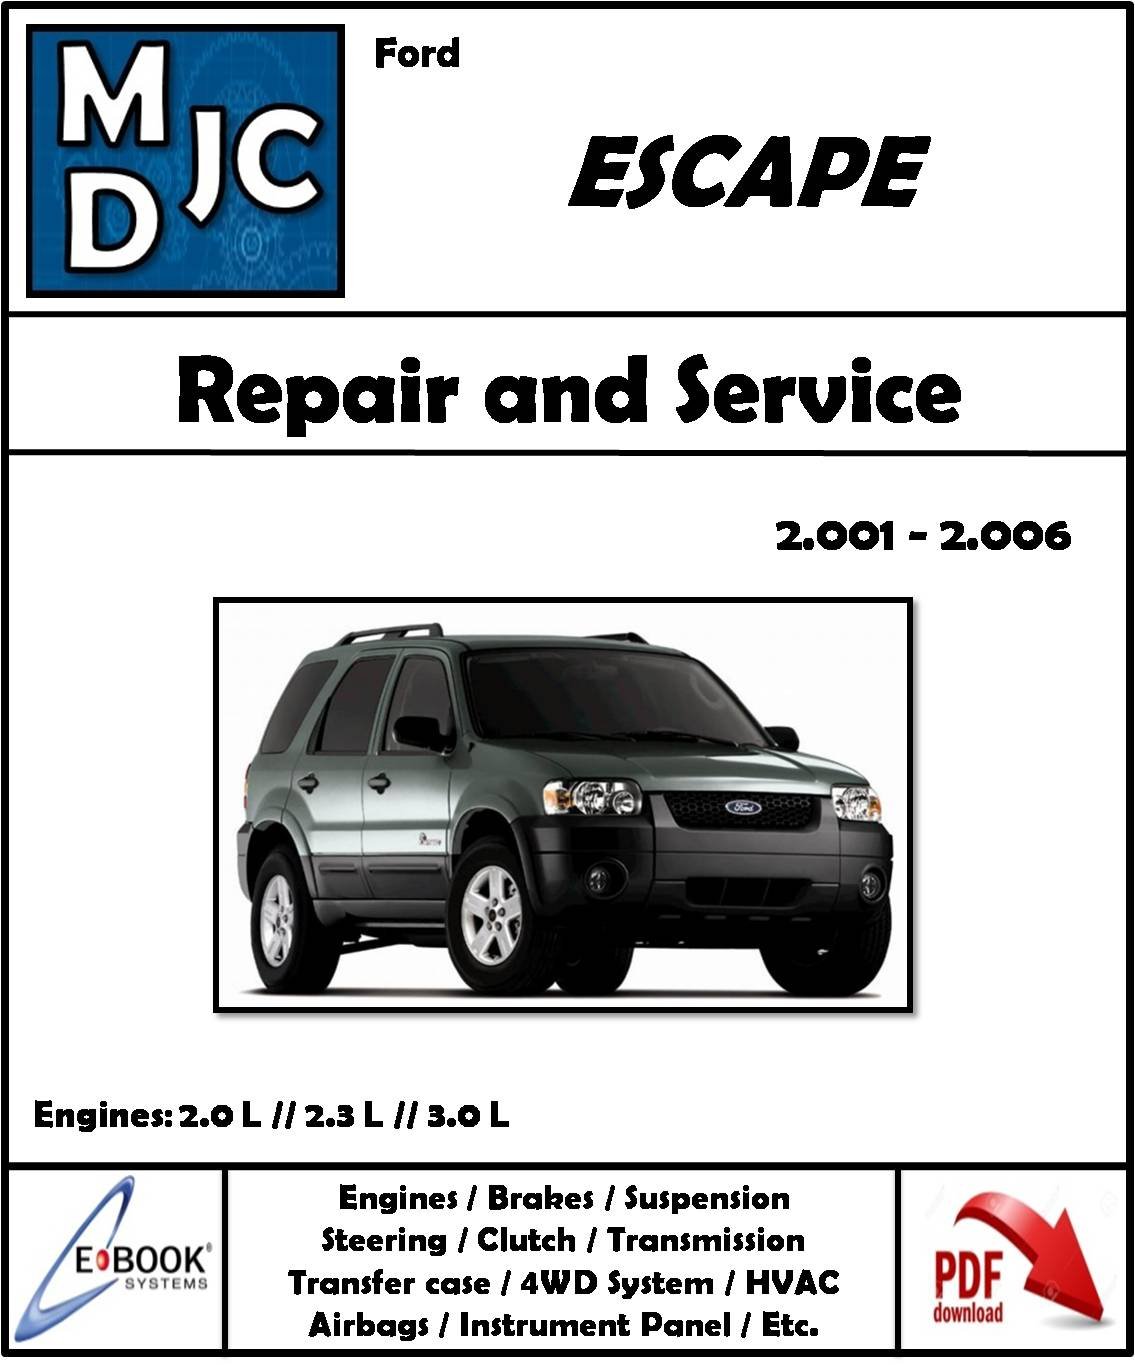 2006 ford escape manual pdf download how to download itunes on pc laptop